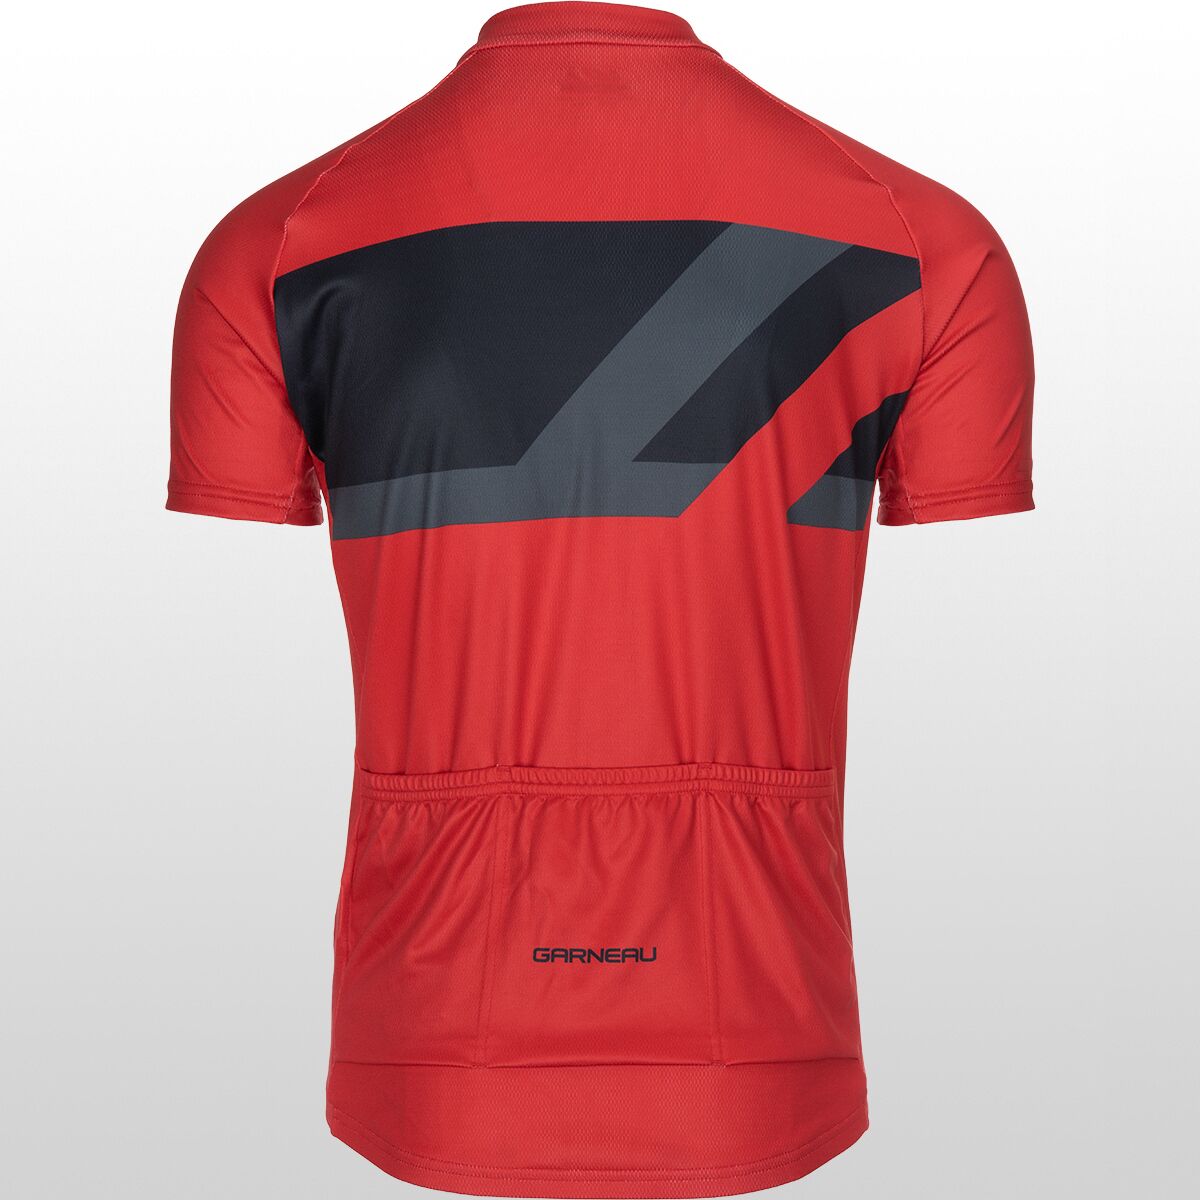 Louis Garneau Men's PRT Cycling Jersey, Large, Navy Multicolor | Holiday Gift